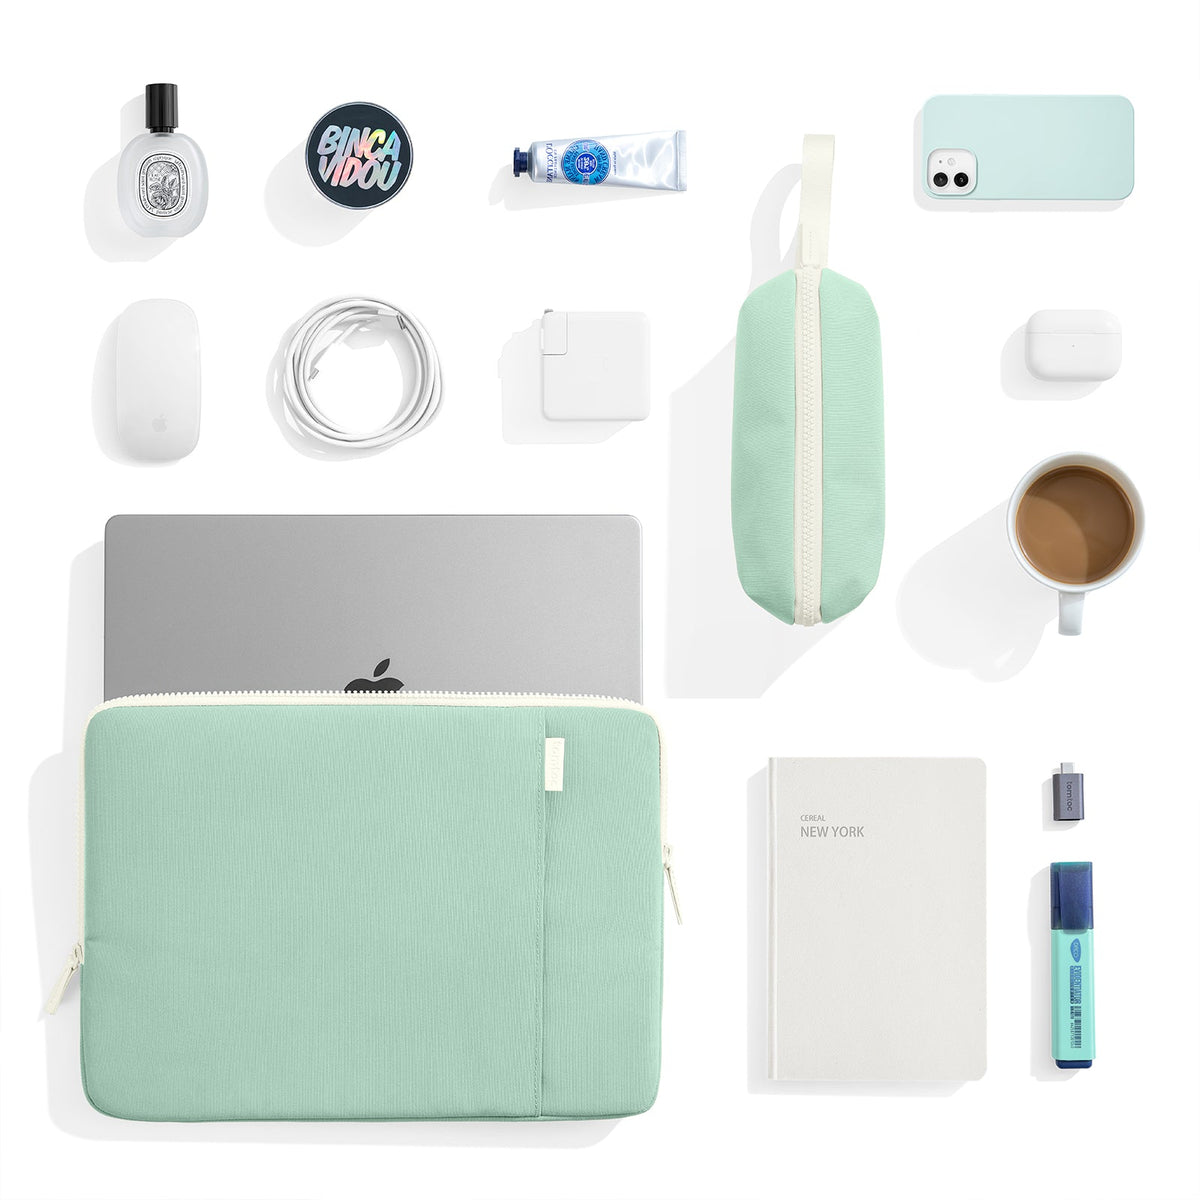 secondary_TheHer-A23 Jelly Laptop Sleeve Kit for 13-inch MacBook Air